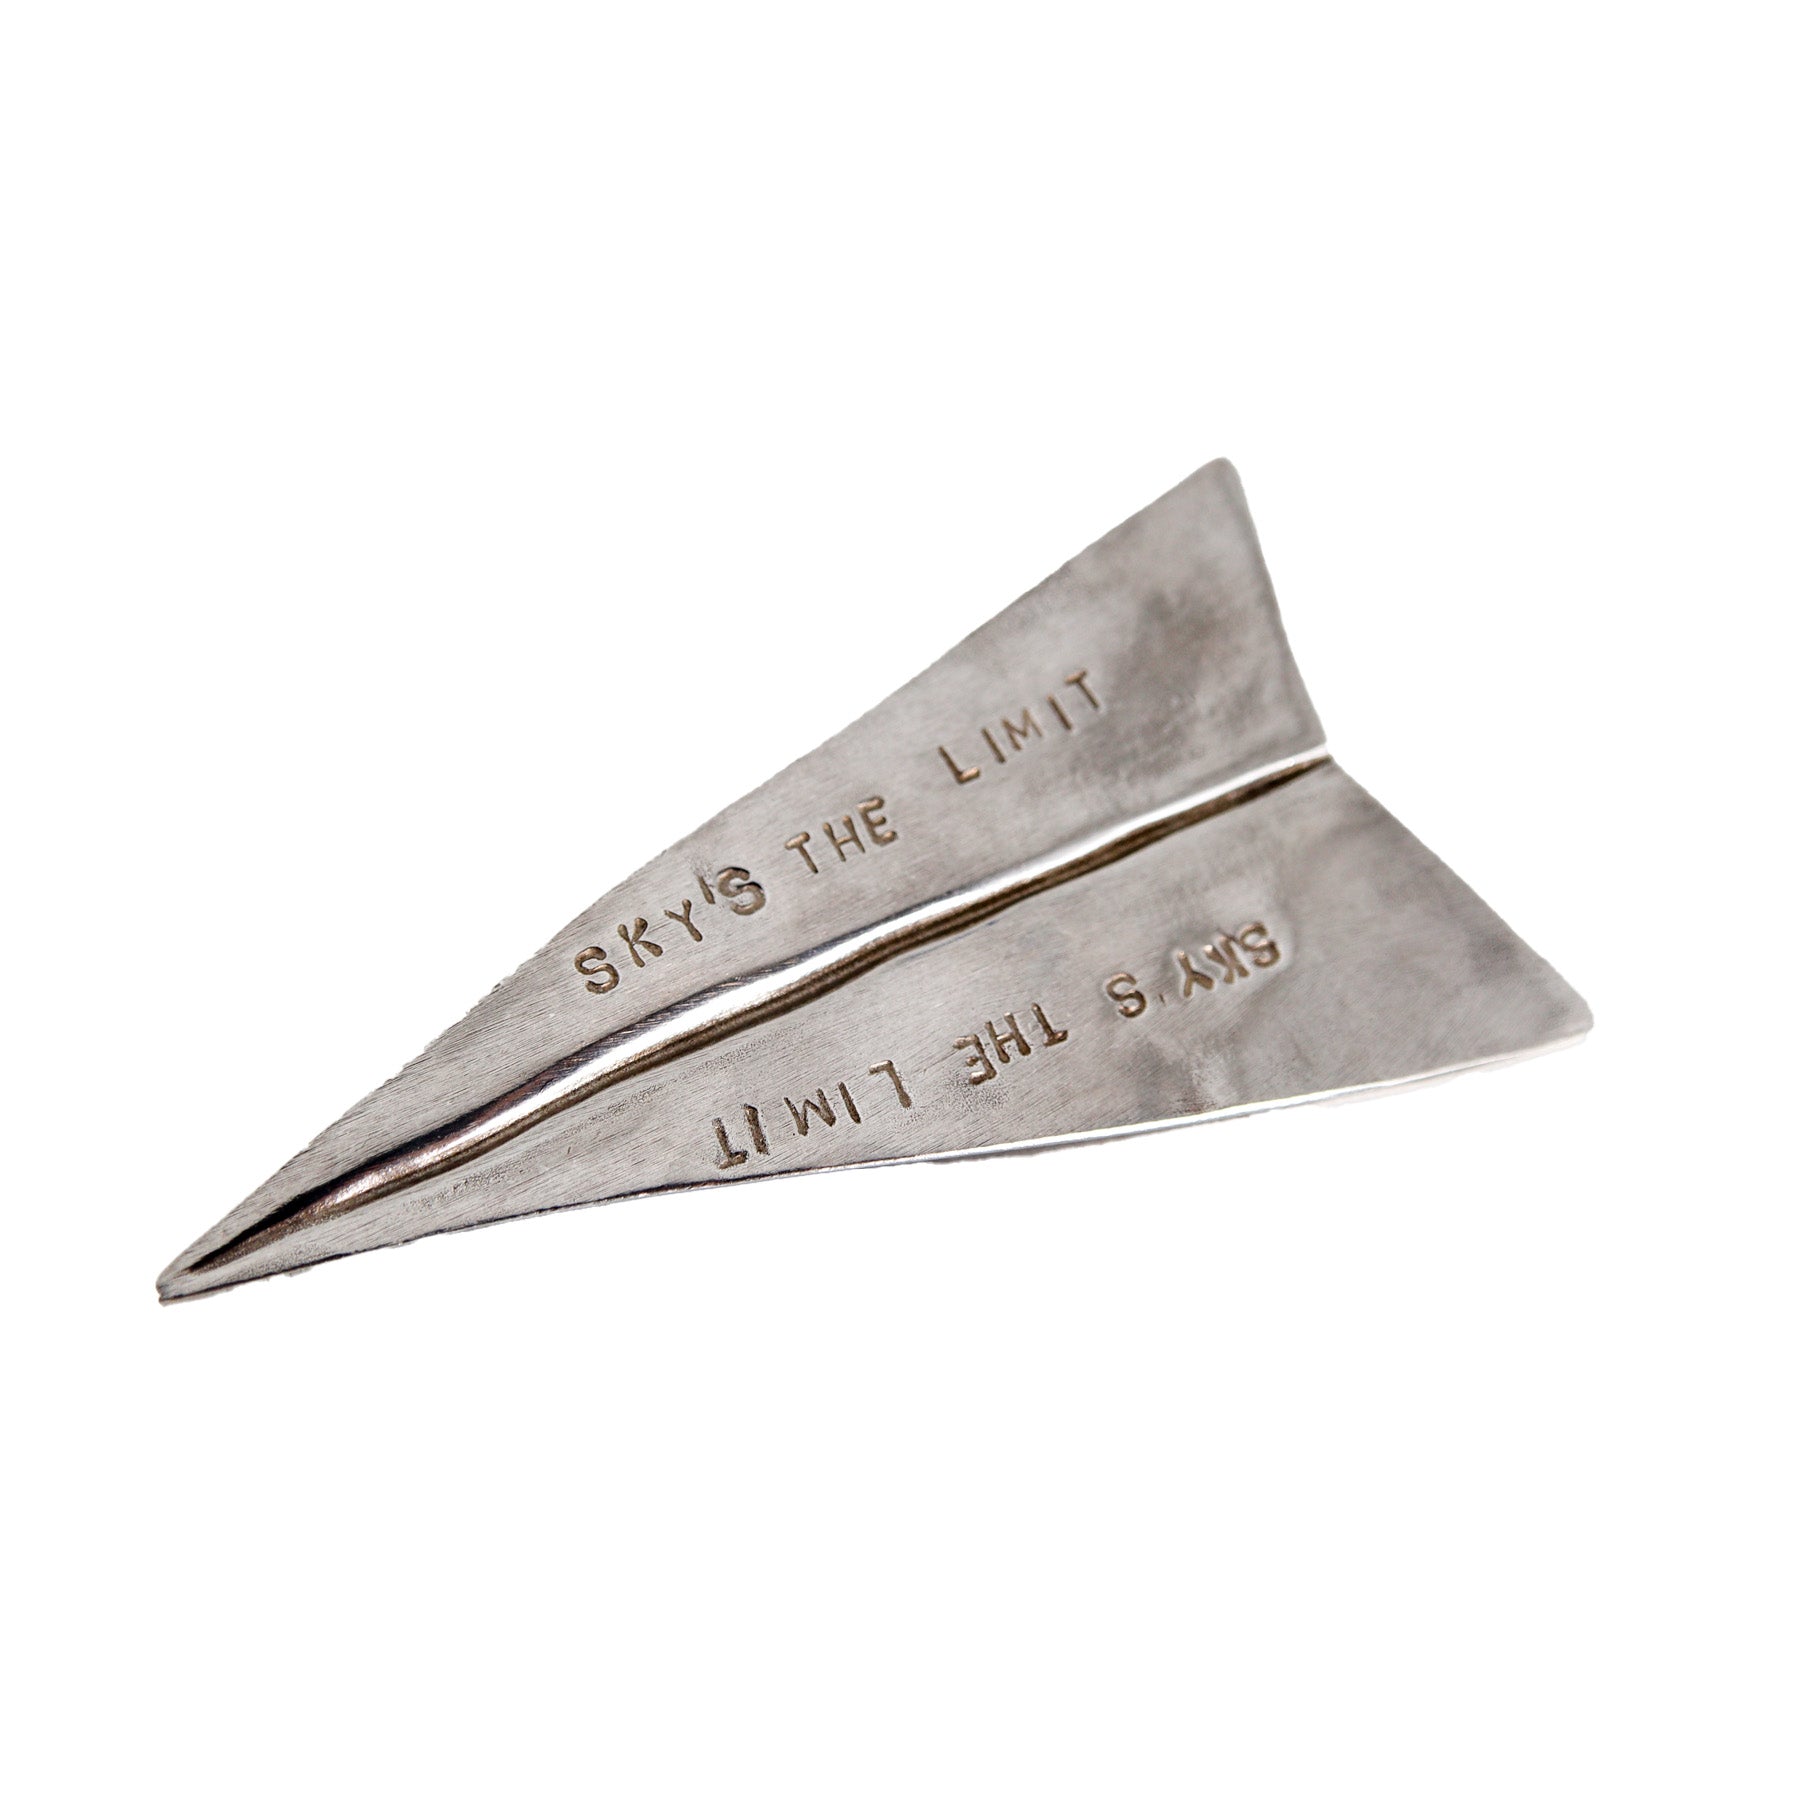 Tamara Hensick, Paper Airplane Sculpture with Inspirational Quote